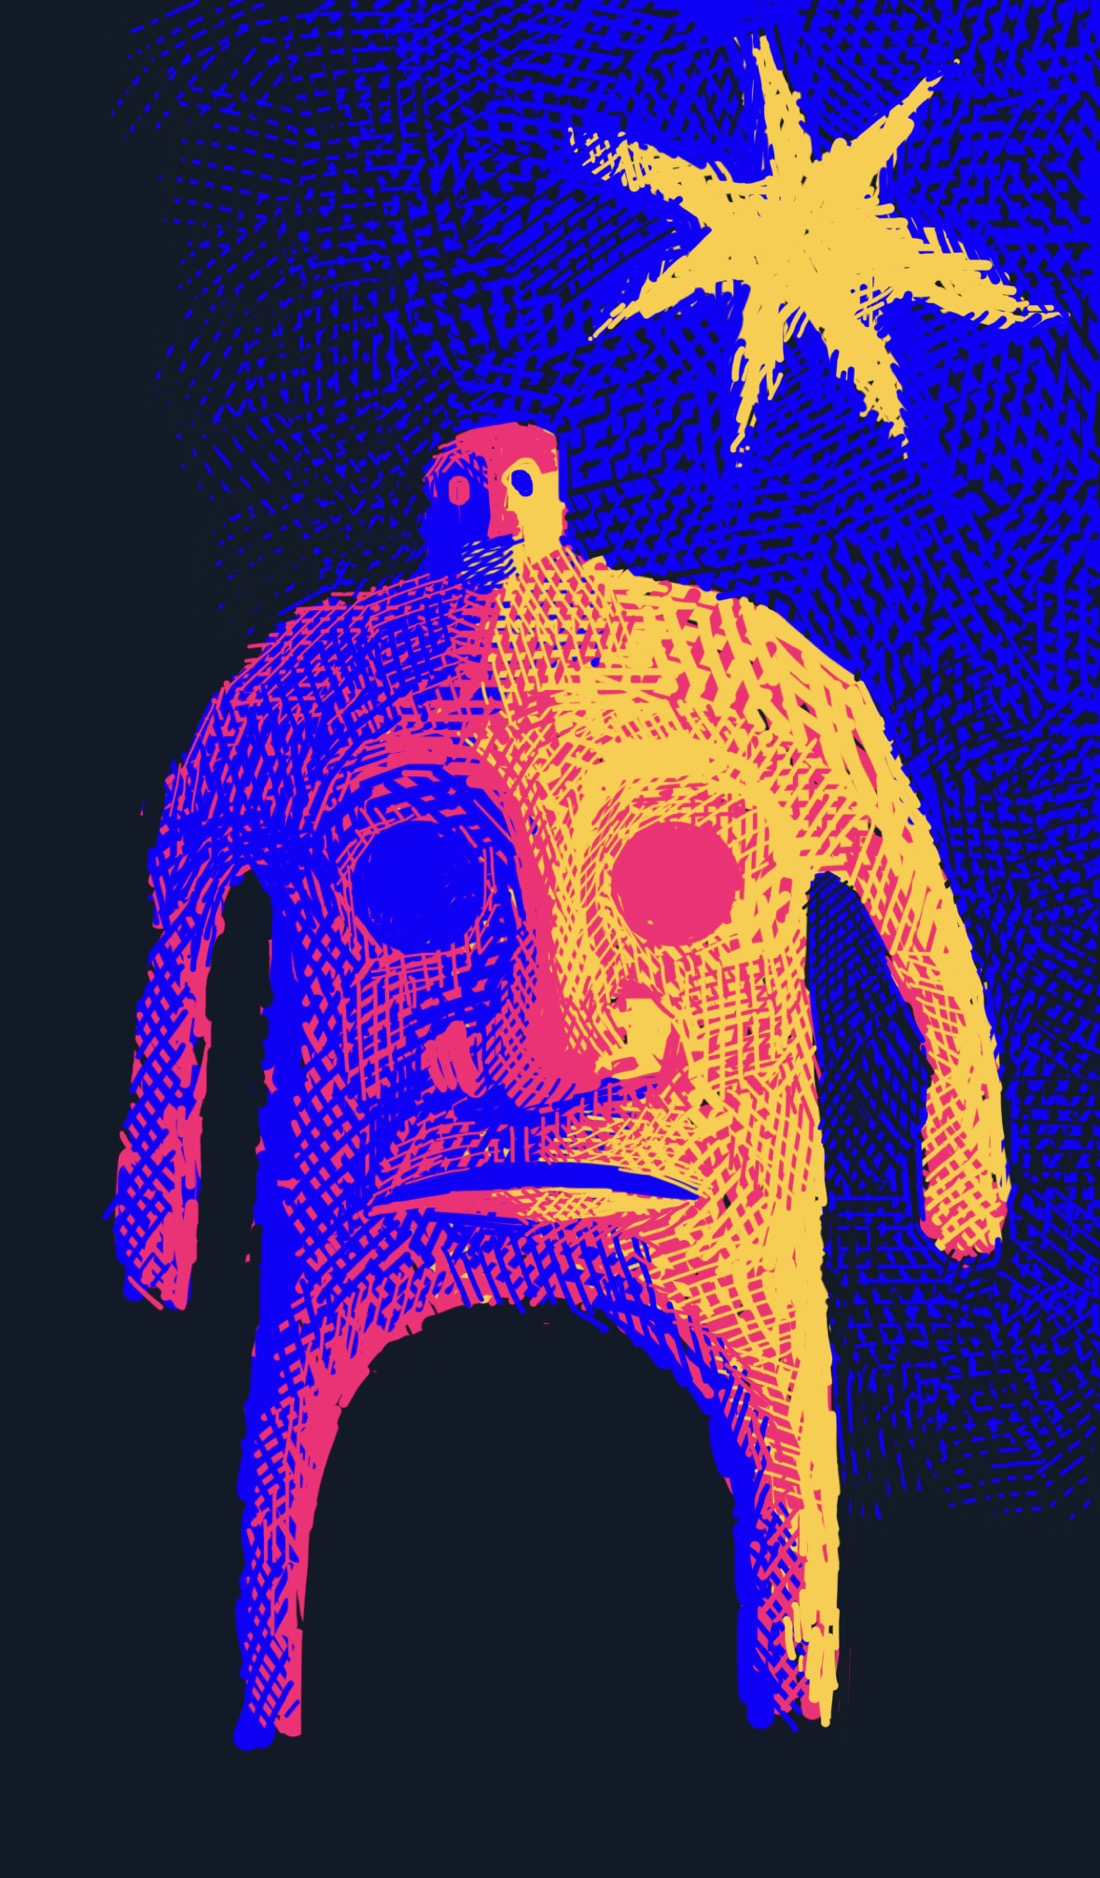 A figure with exaggerated proportions—small head, thin arms and legs, a very wide body—stands on a black background. The figure's chest is covered by an expressionless face with empty eyes. The figure is standing beneath a bright yellow star.